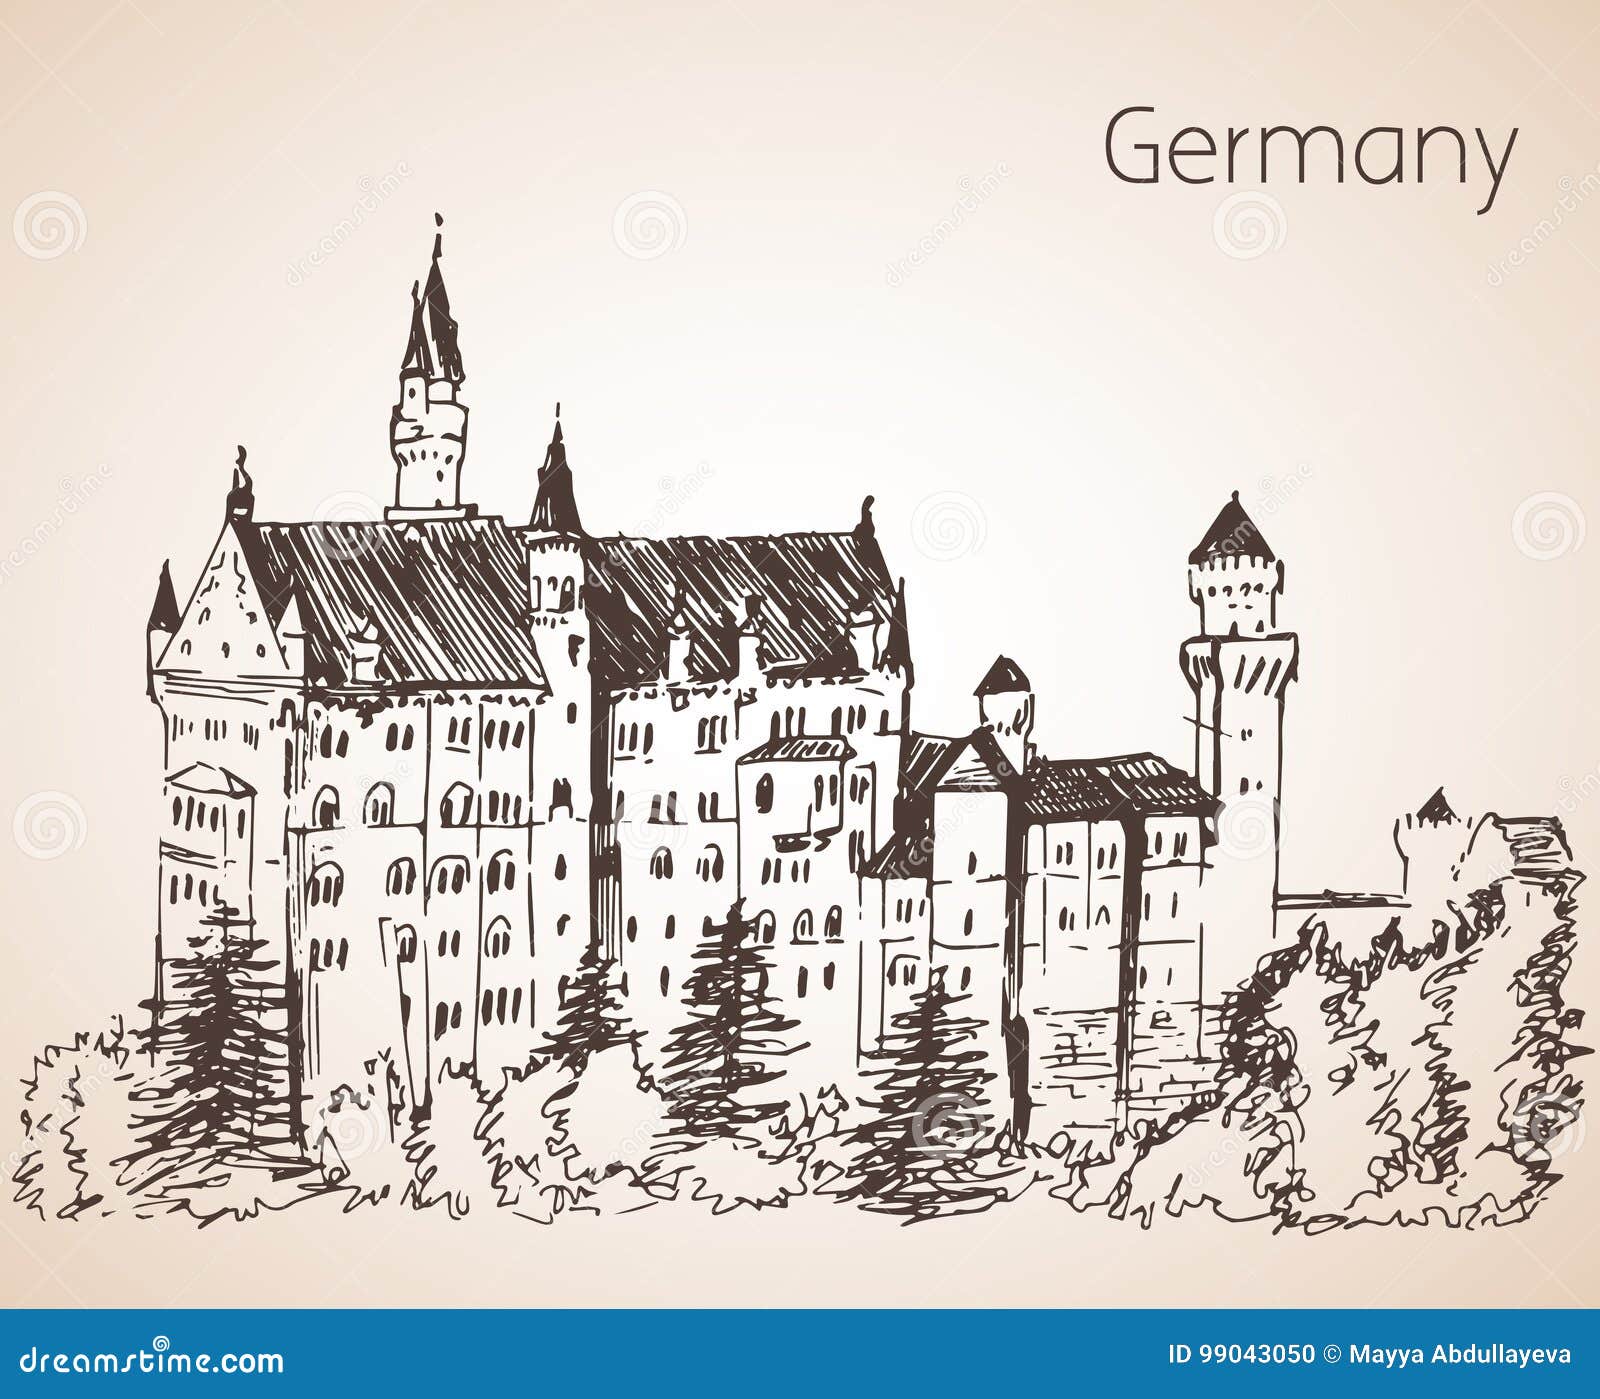 Premium AI Image | Here we have a drawing of the famous Neuschwanstein  Castle in the German Alps